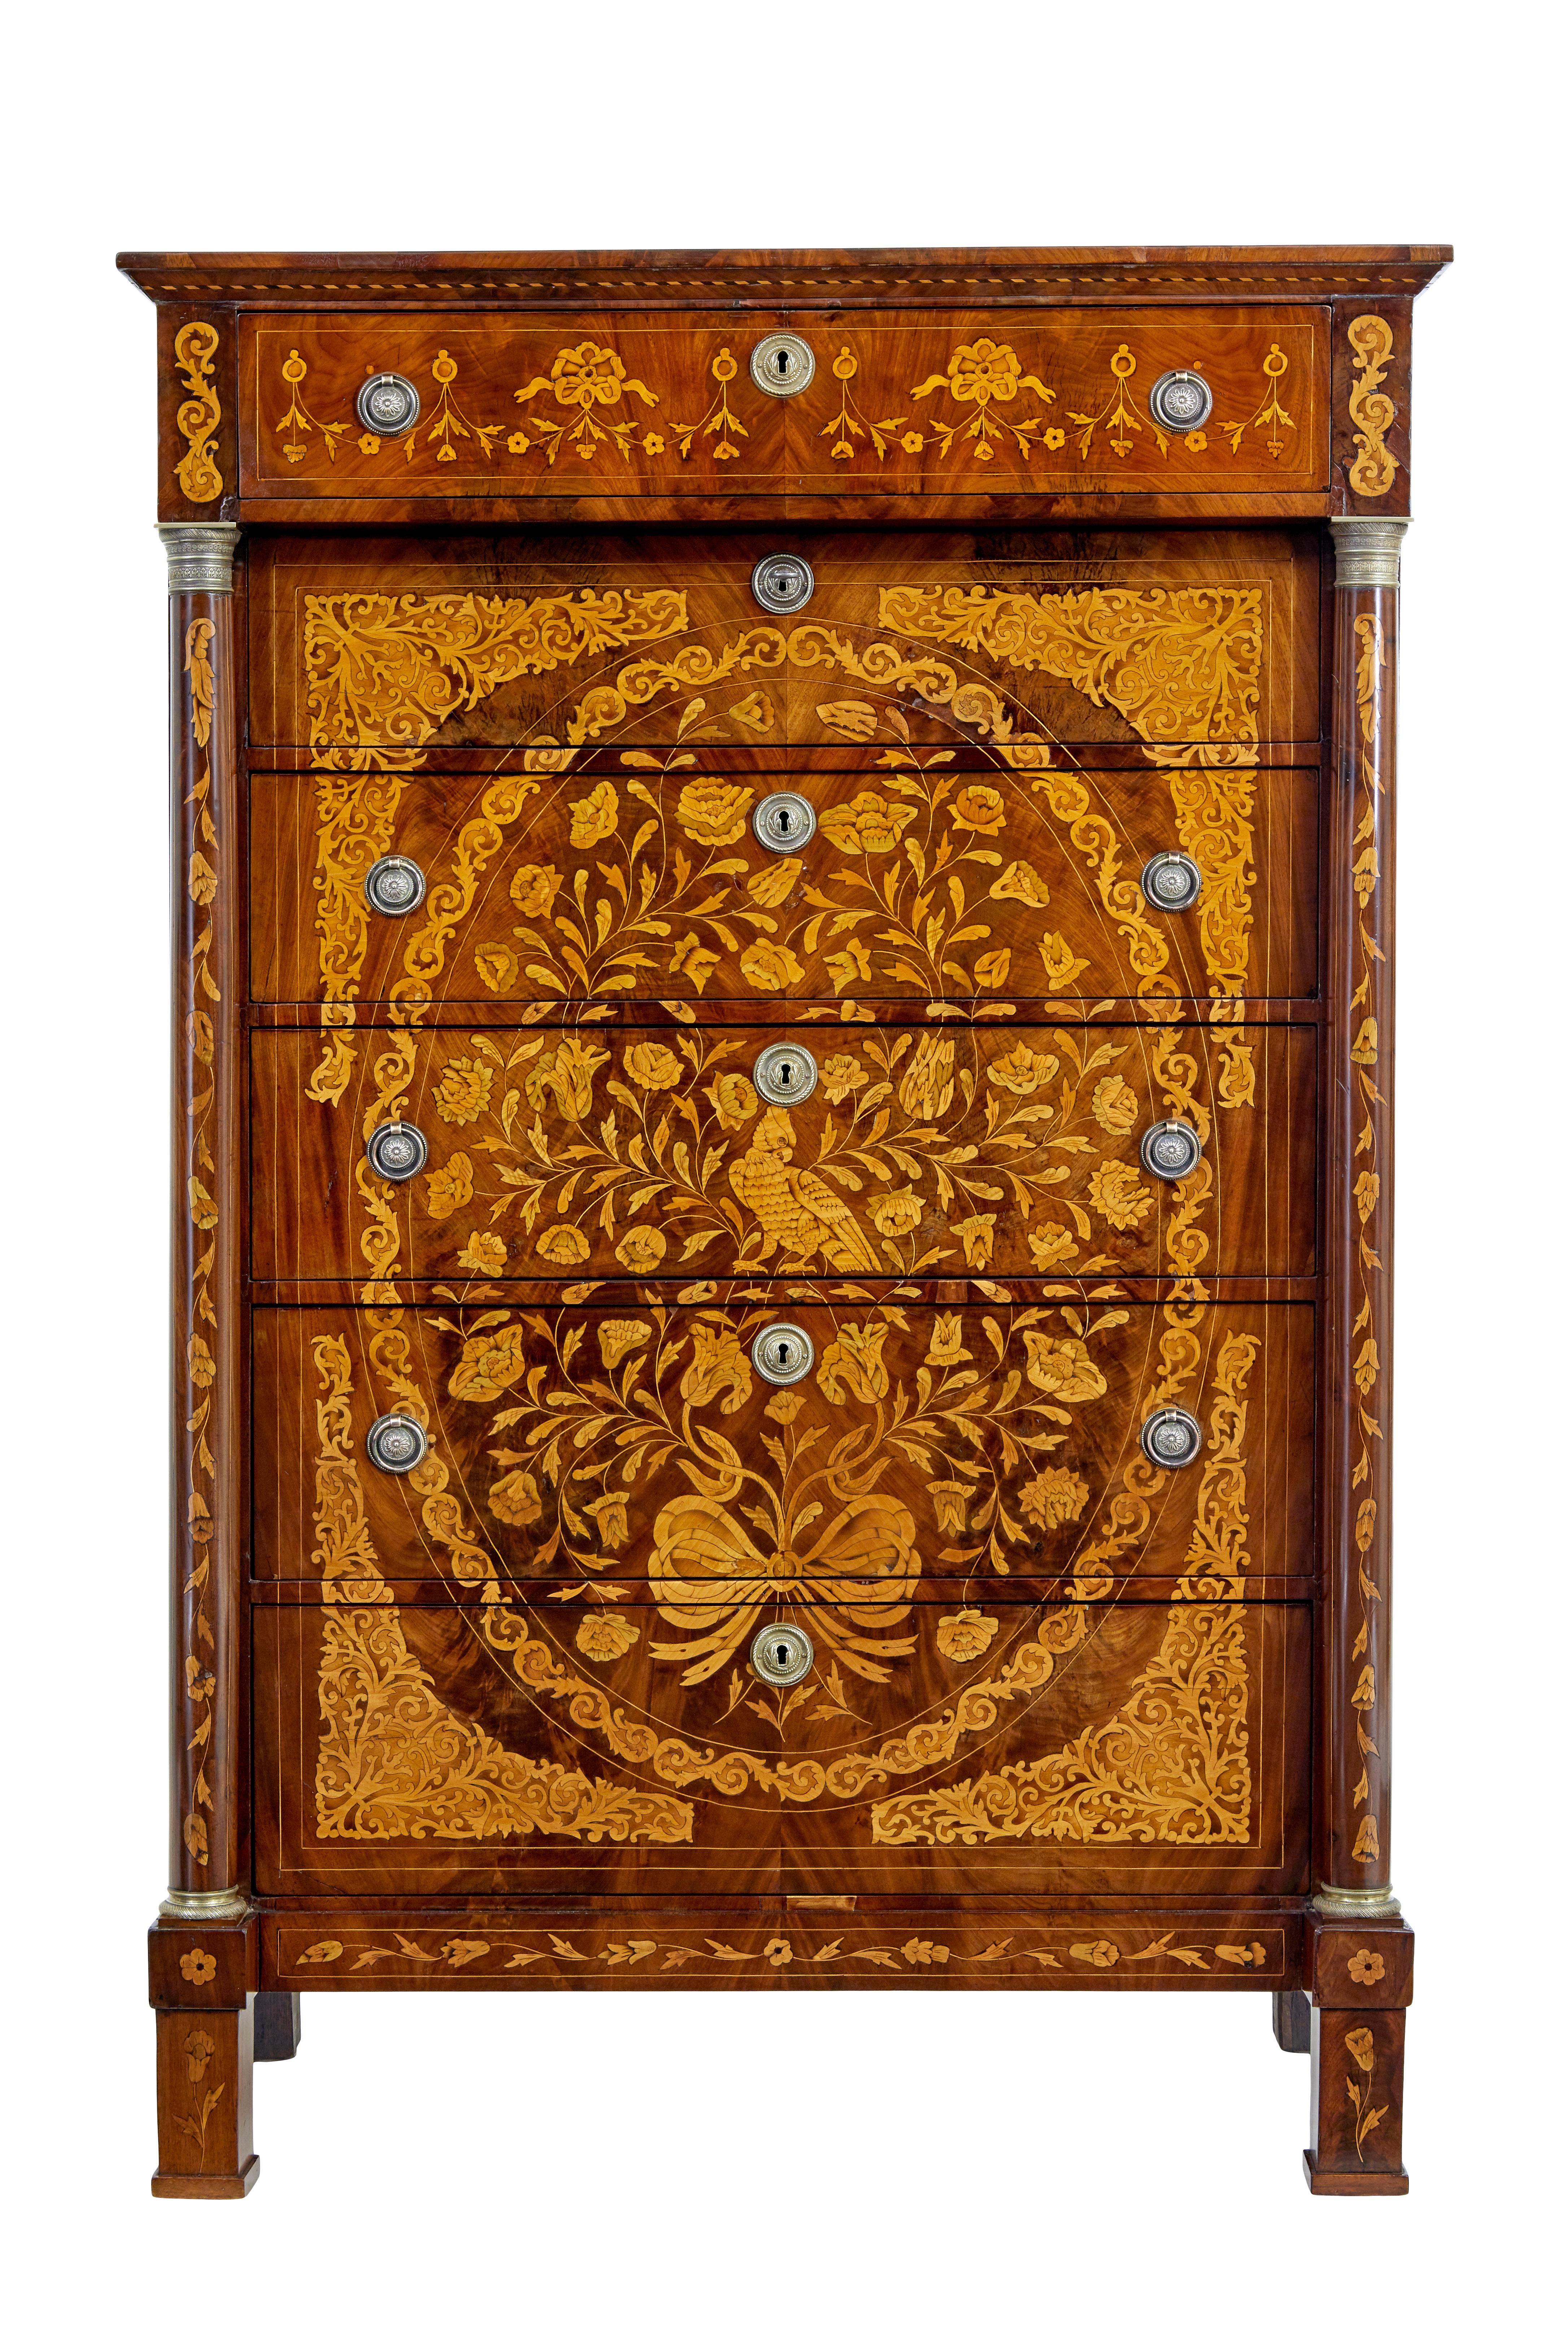 Mahogany 19th Century French inlaid mahogany 6 drawer inlaid chest For Sale